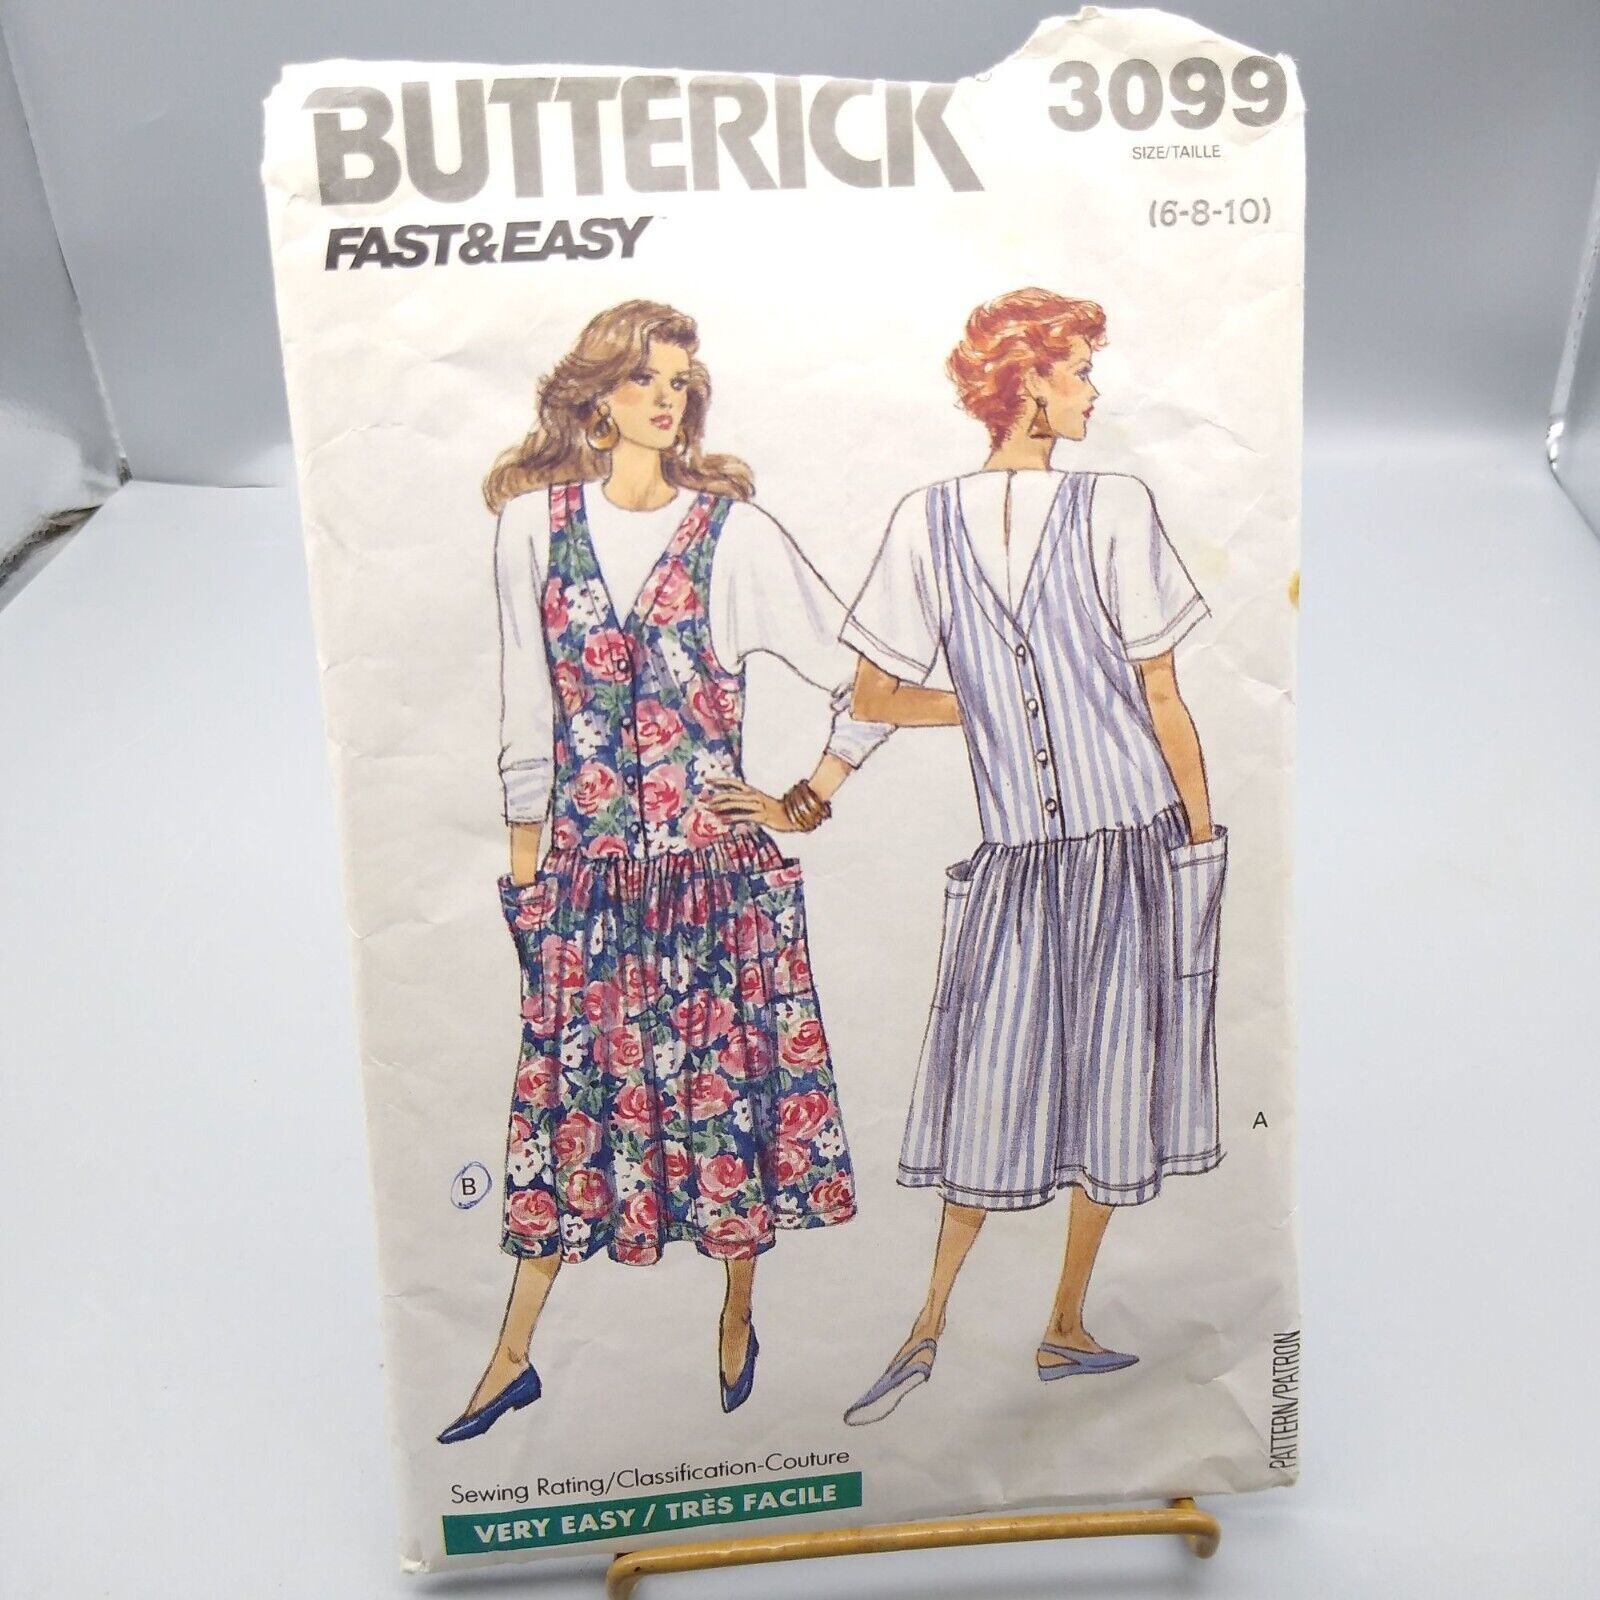 Primary image for Vintage Sewing PATTERN Butterick 3099, Misses Fast and Easy 1989 Jumper and Top